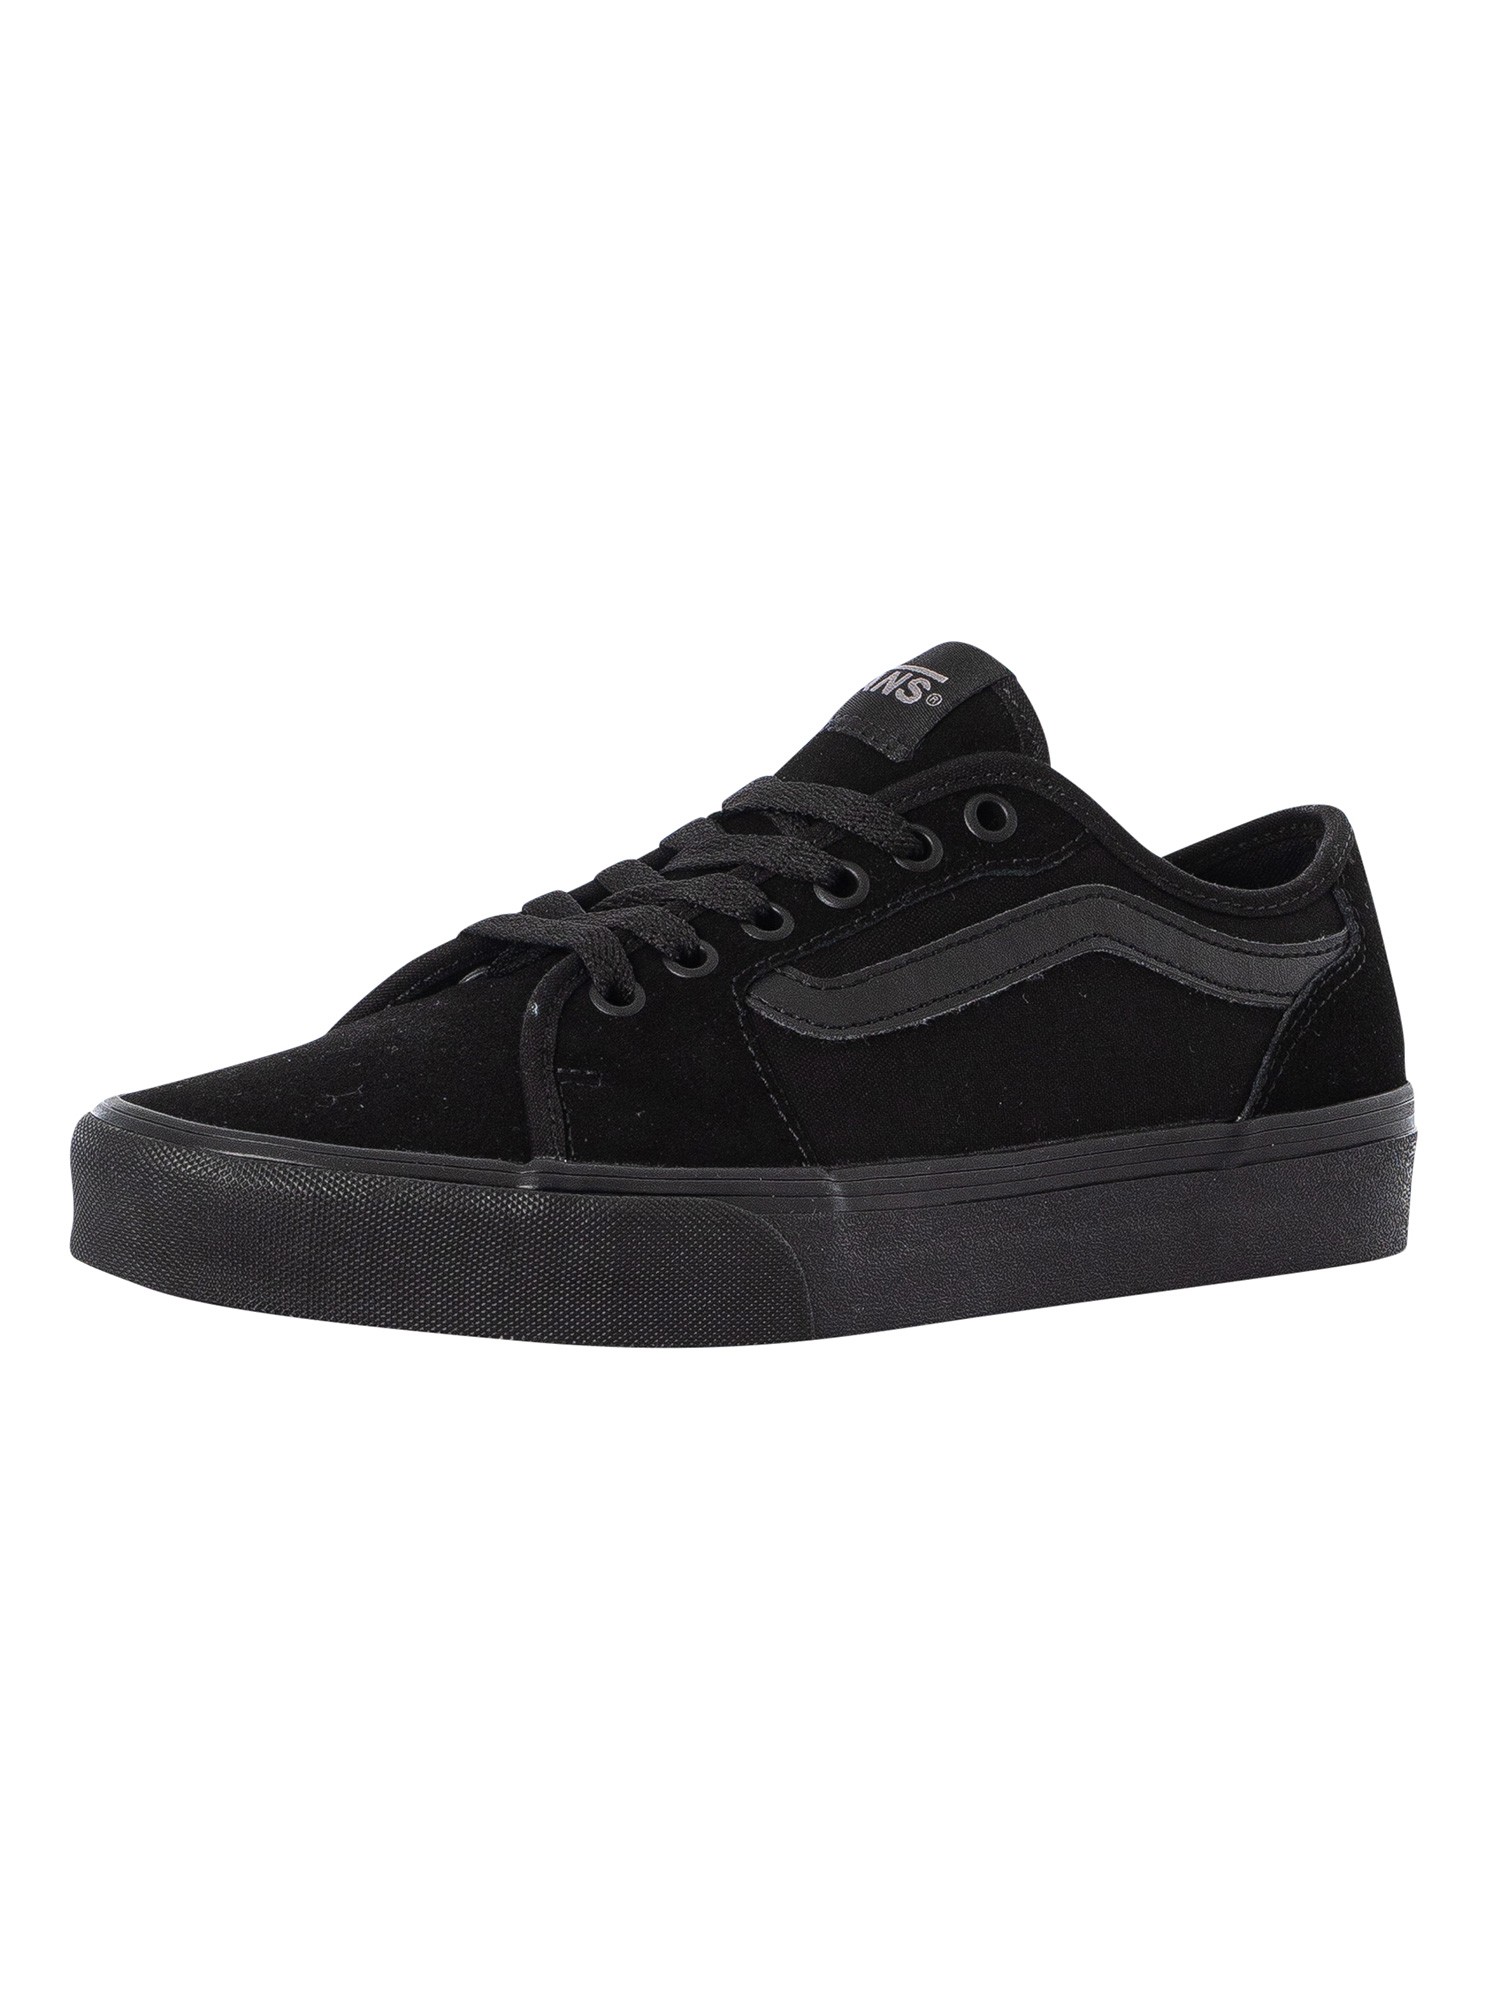 Filmore Decon Suede Canvas Trainers product